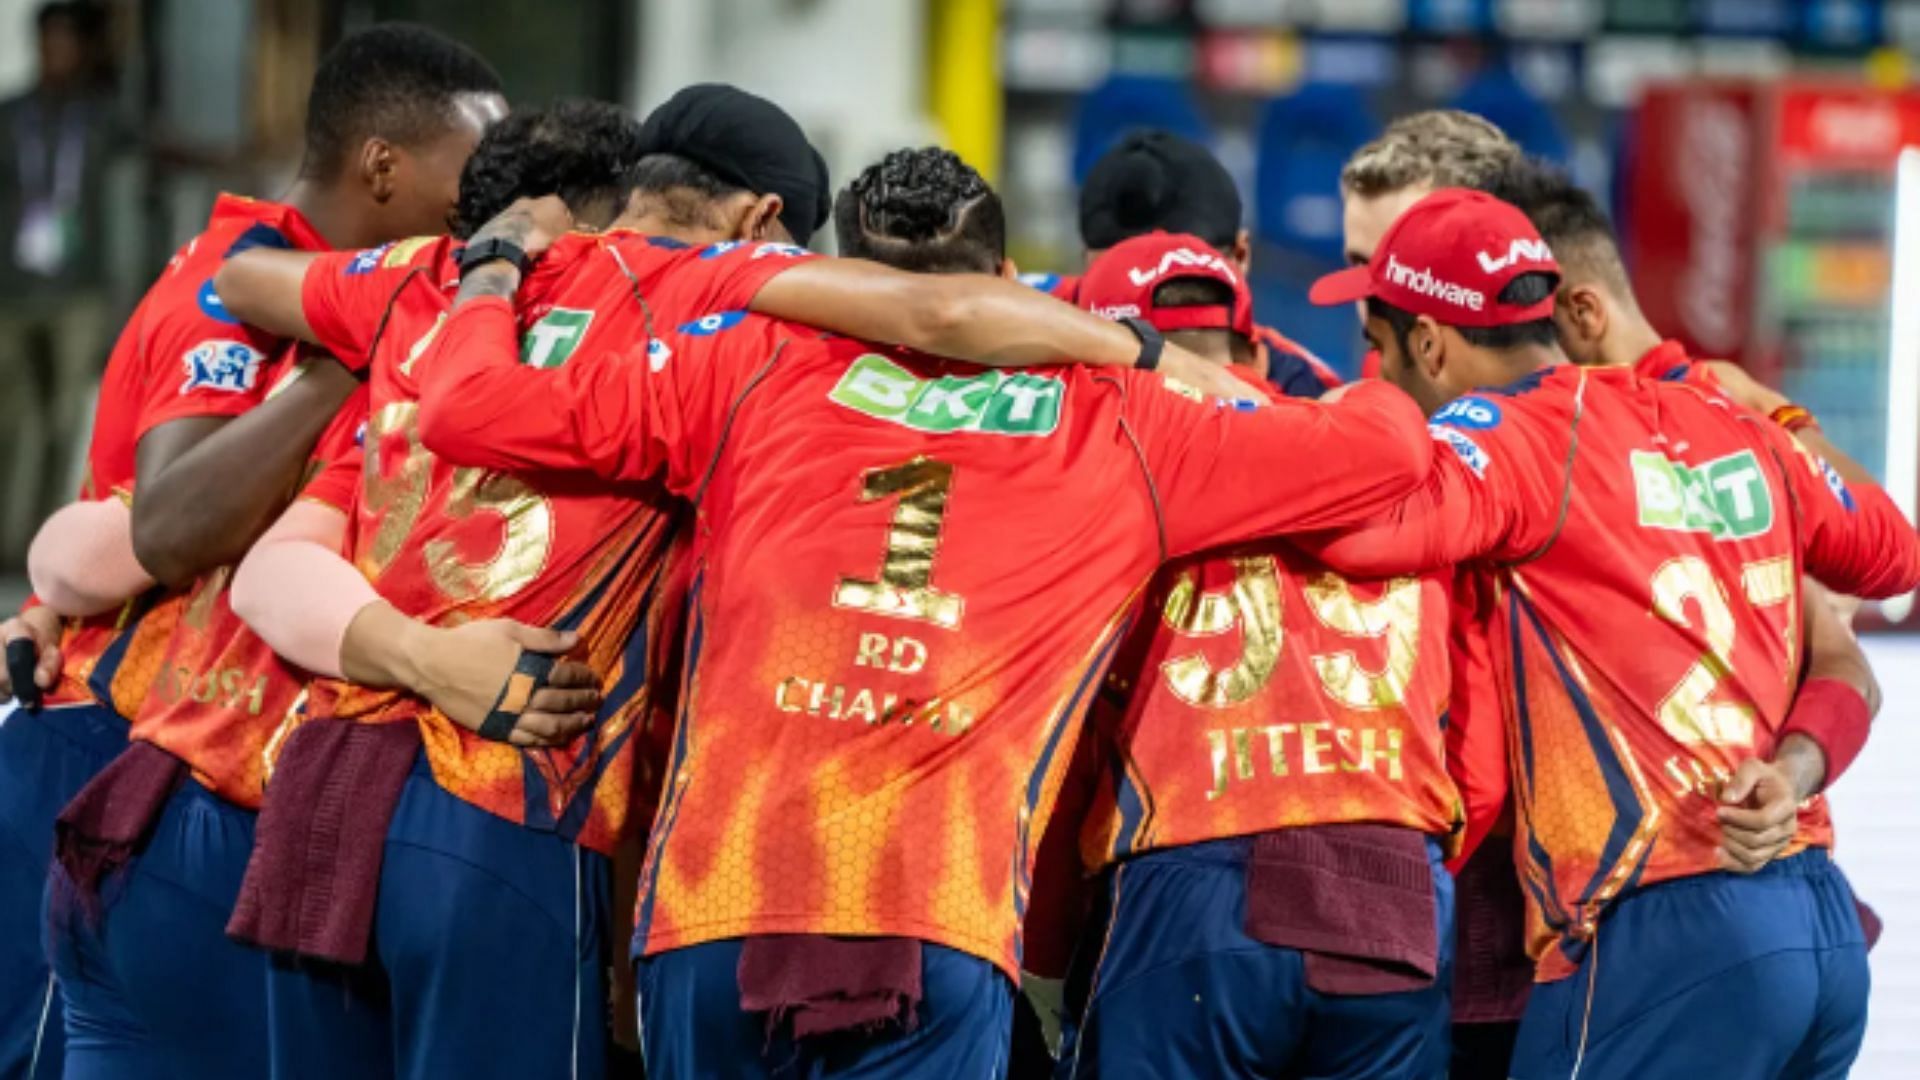 Punjab Kings has been eliminated from the 17th edition of the IPL.